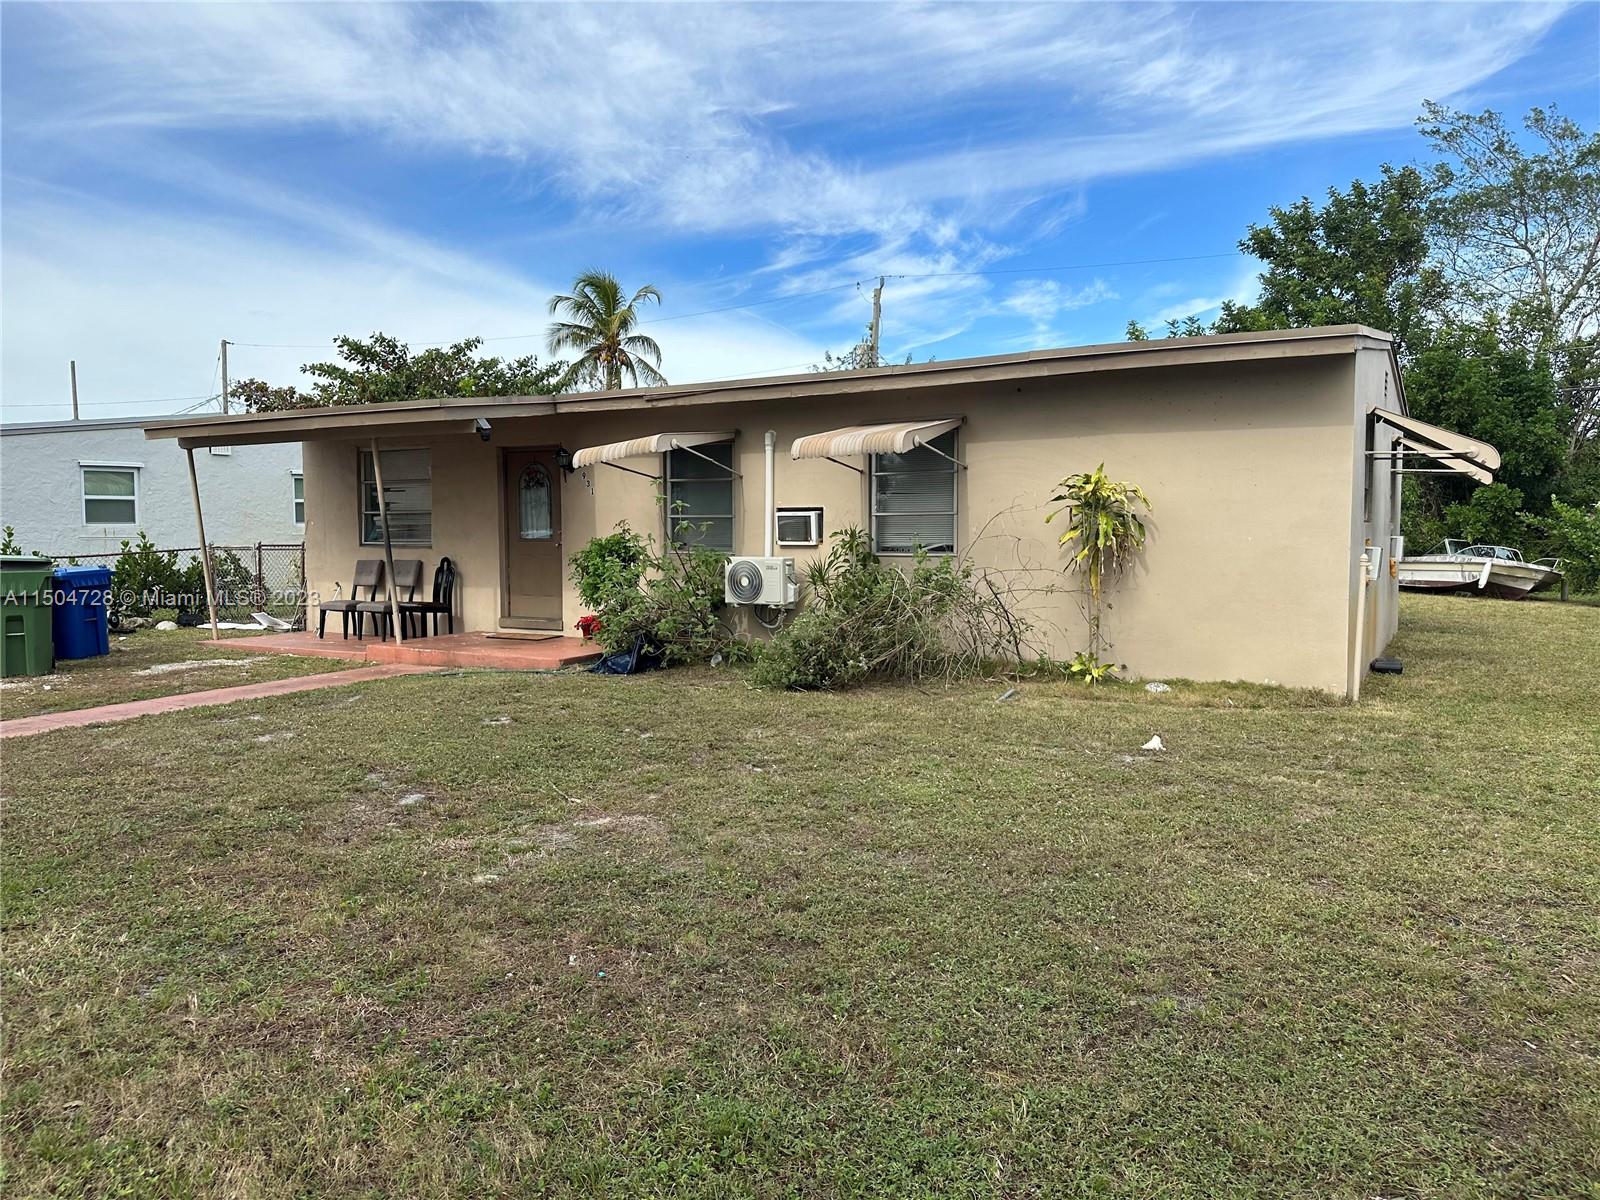 931 Chateau Park Dr, Fort Lauderdale, Broward County, Florida - 3 Bedrooms  
1 Bathrooms - 